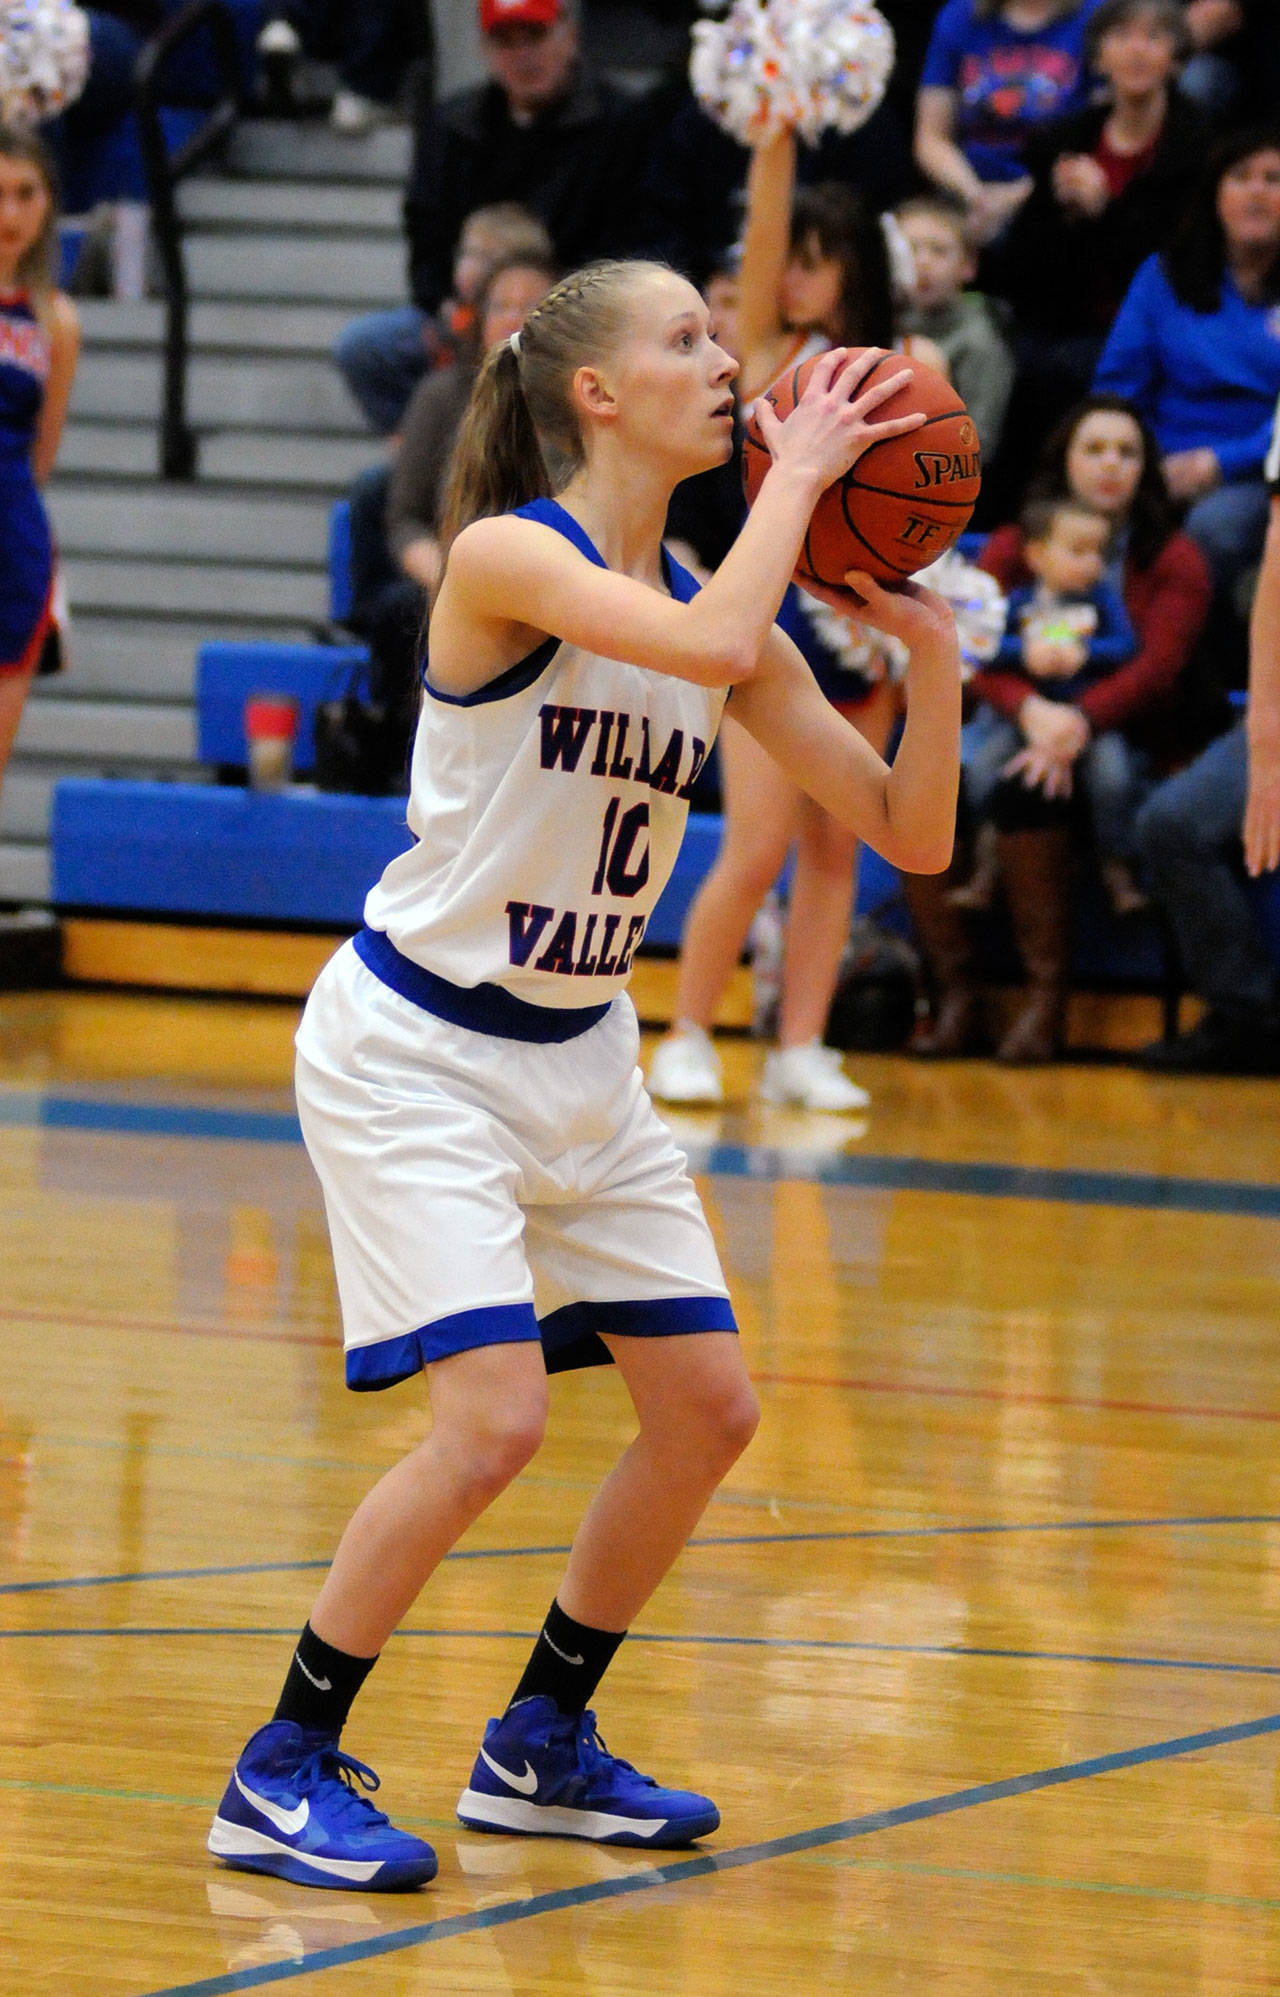 Willapa Valley’s Hannah Cook, seen here in a Daily World file photo, went 4-for-4 from the free-throw line late in the game to help the Vikings defeat Onalaska 49-44 in overtime in the second round of the 2B District IV Tournament on Wednesday. (Ryan Sparks | Grays Harbor News Group)